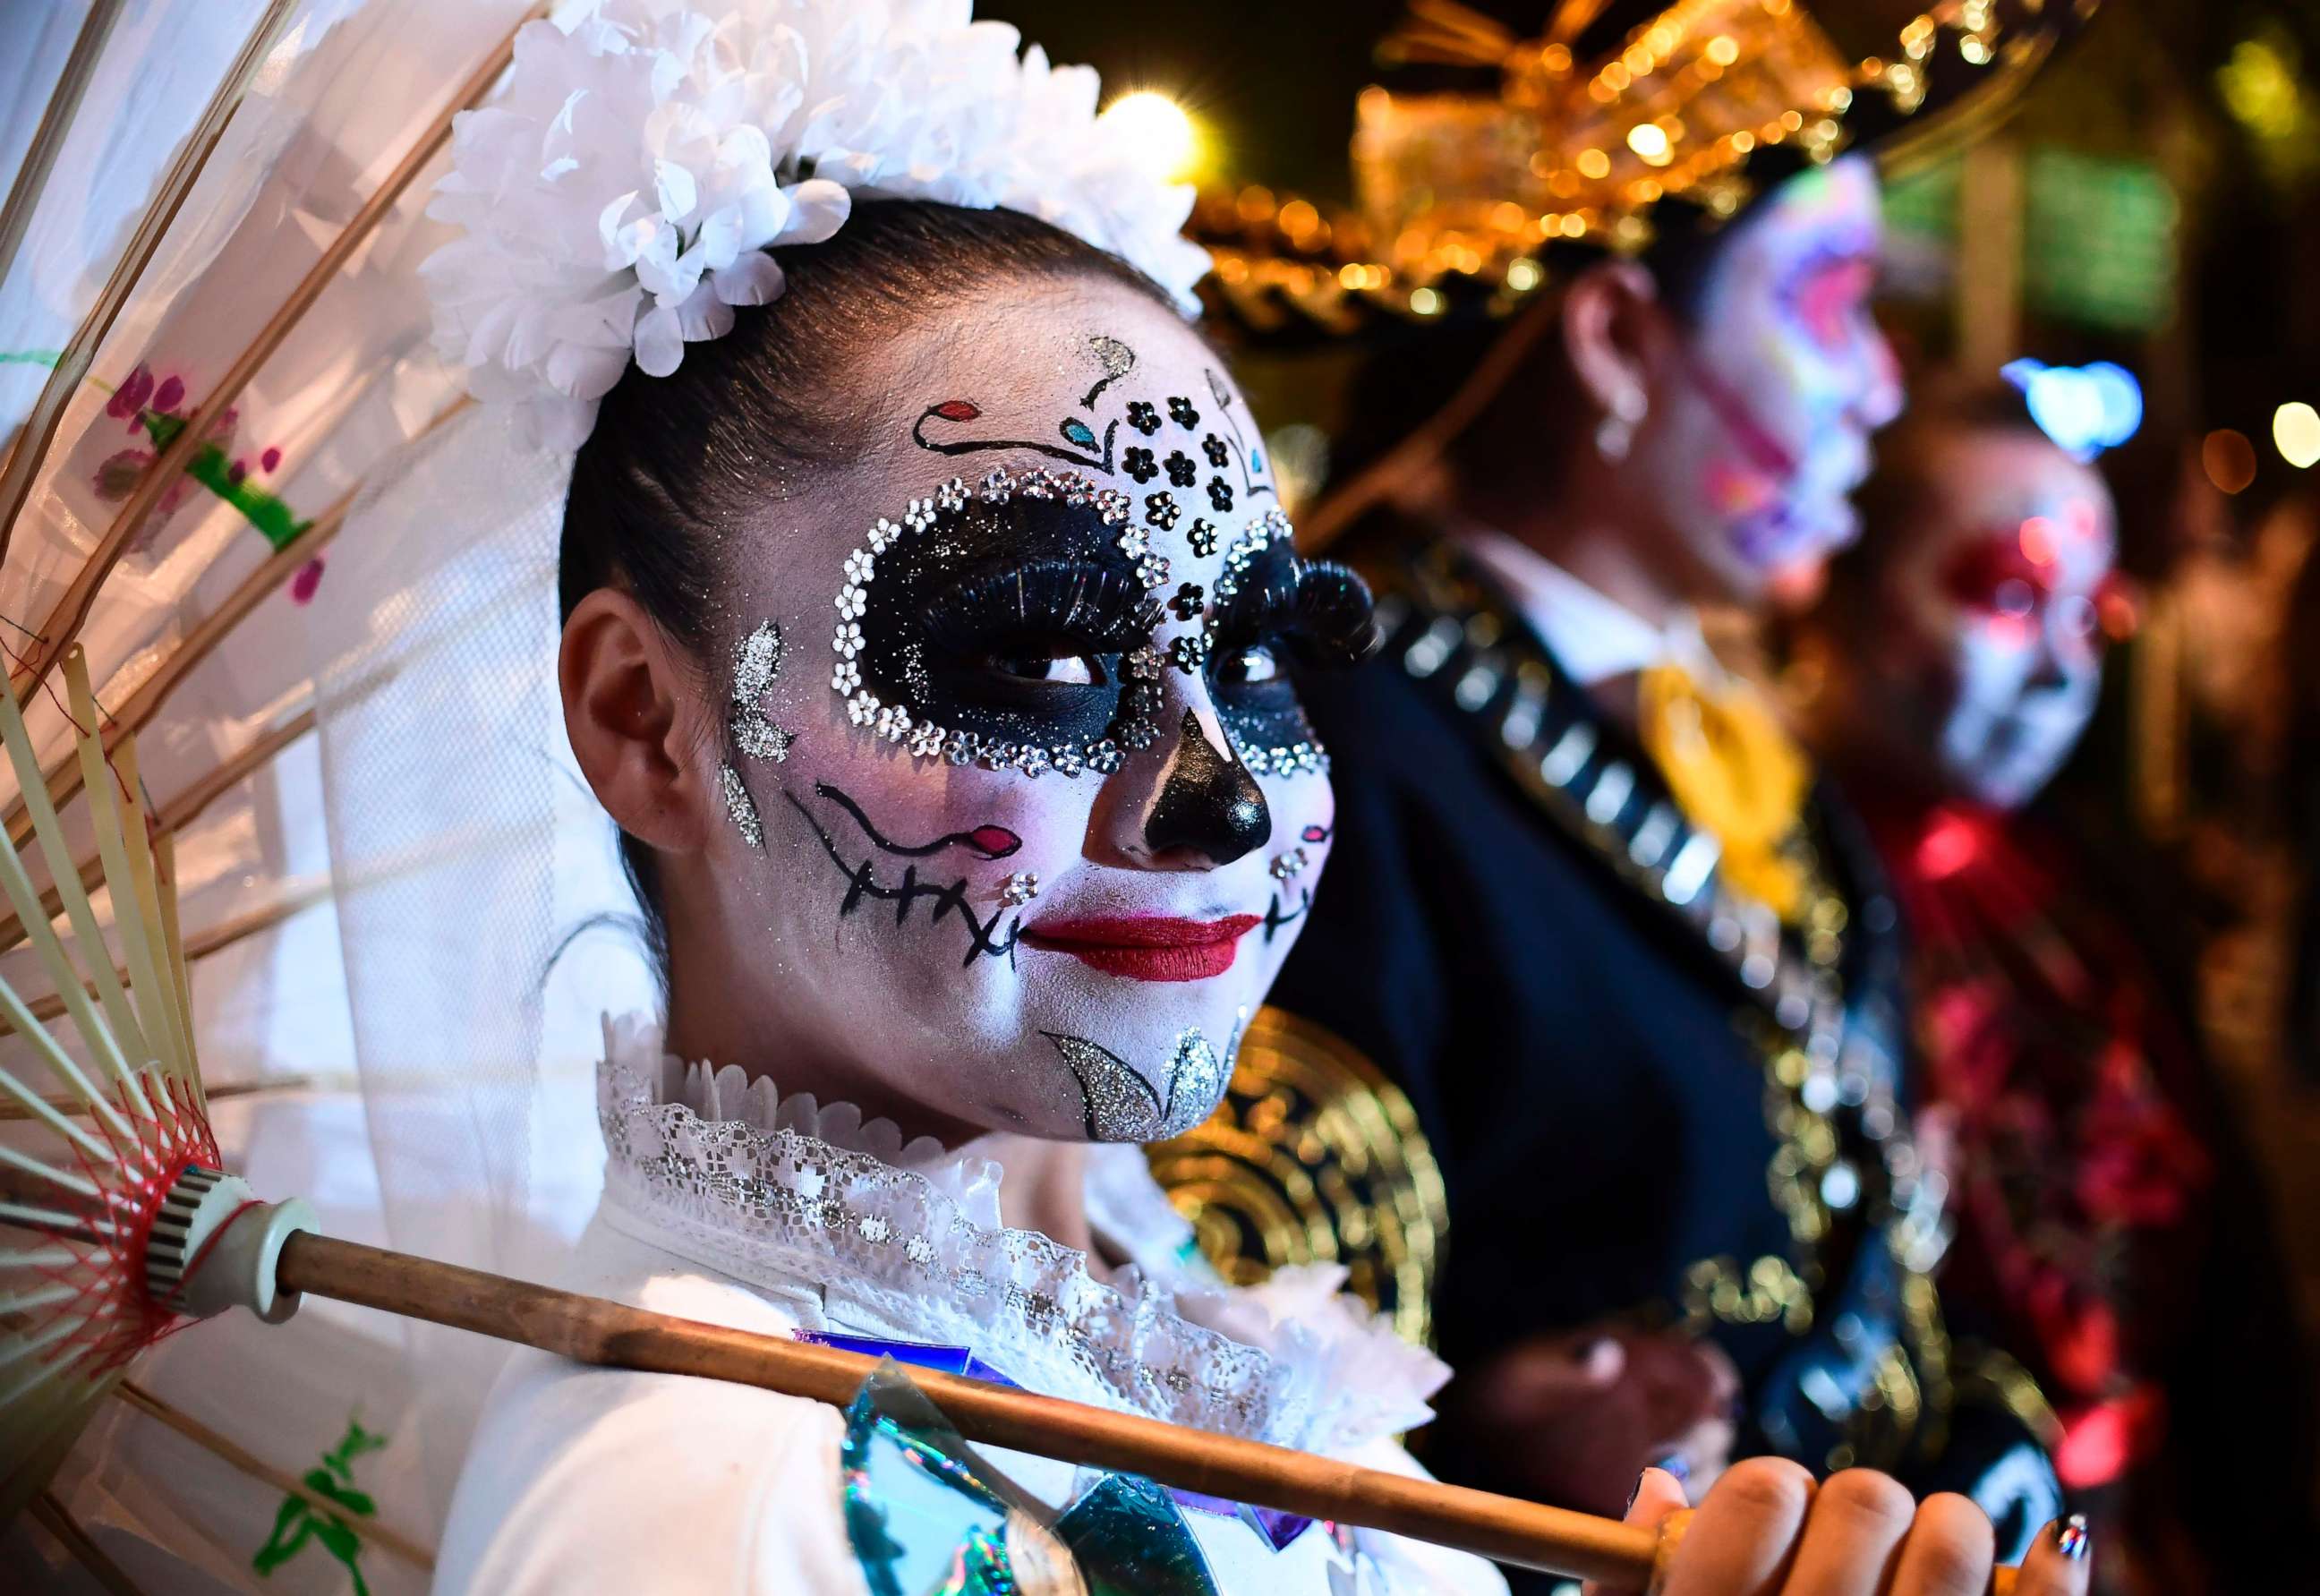 PHOTO: People fancy dressed as "Catrina" take part in the "Catrinas Parade" along Reforma Avenue, in Mexico City, Oct. 22, 2017. 